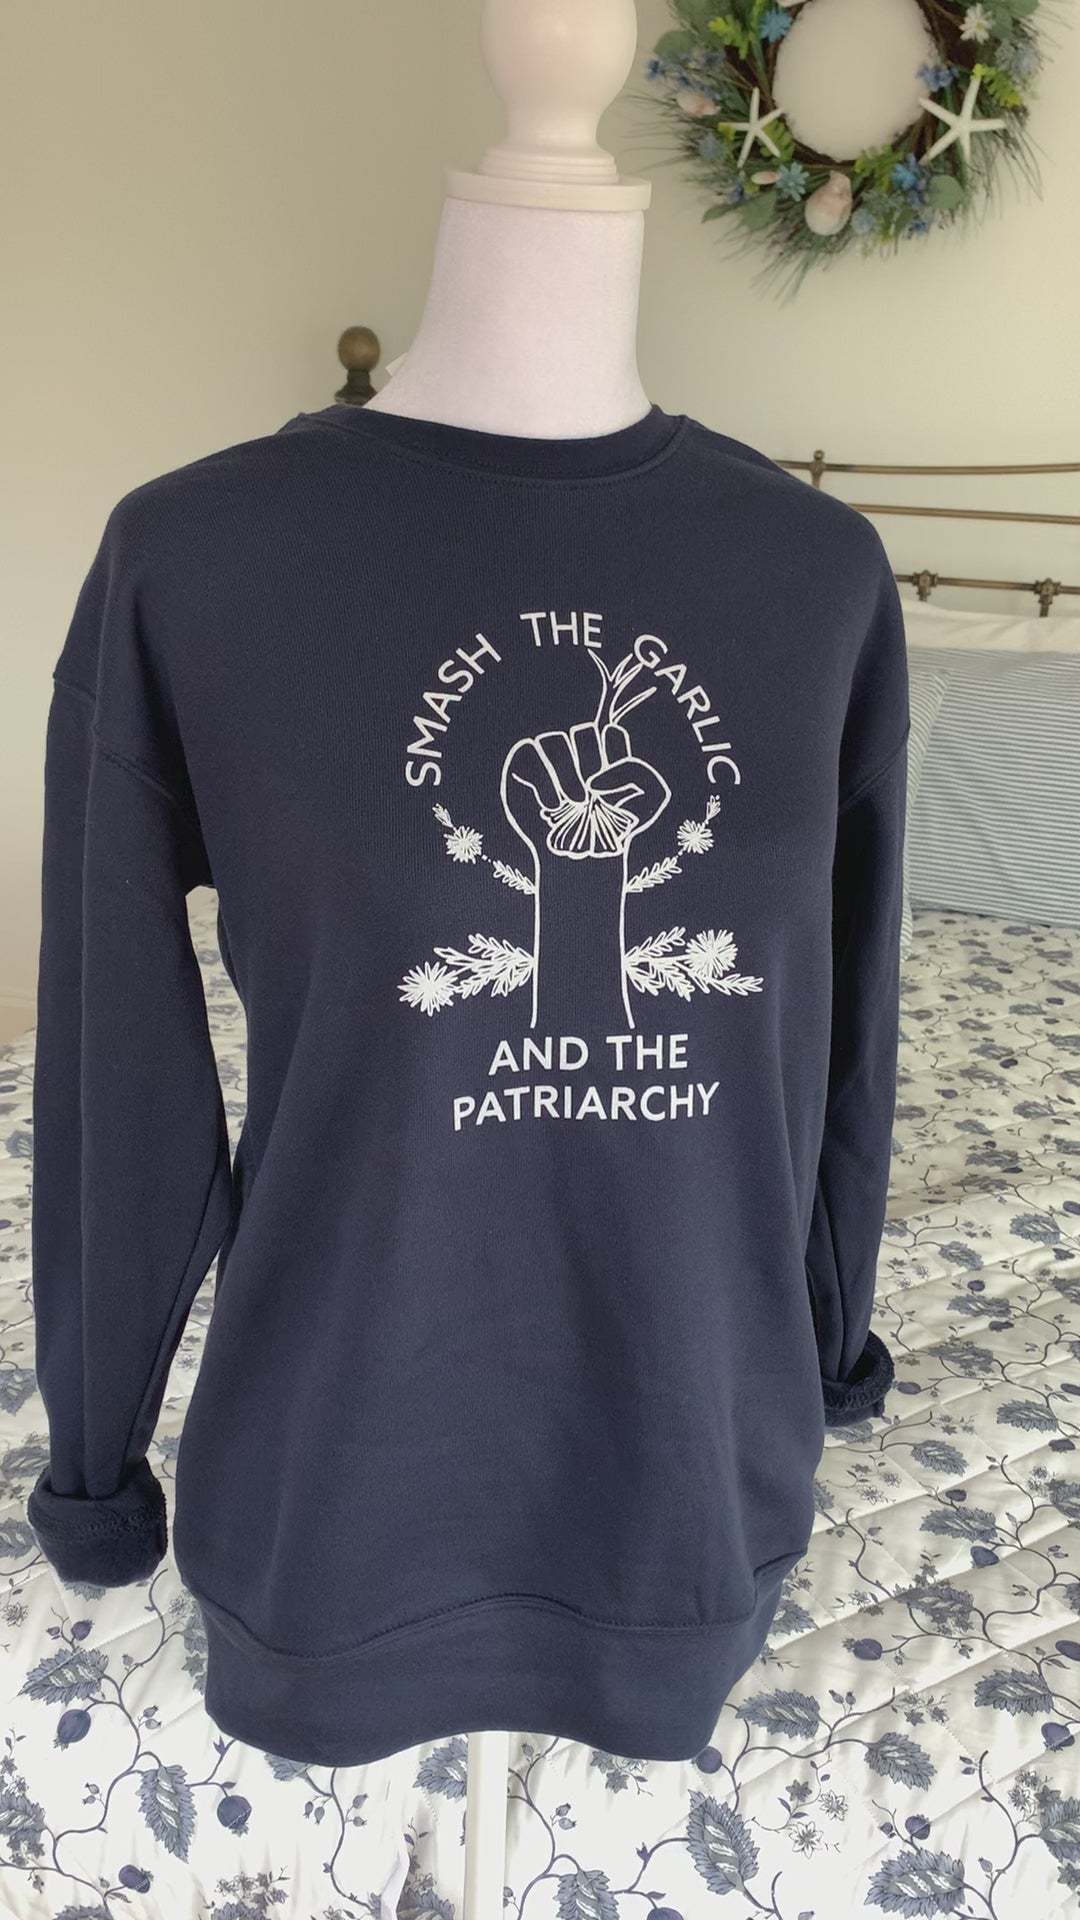 A navy crewneck that reads "Smash the Garlic and the Patriarchy" with a garlic illustration hangs on a manikin